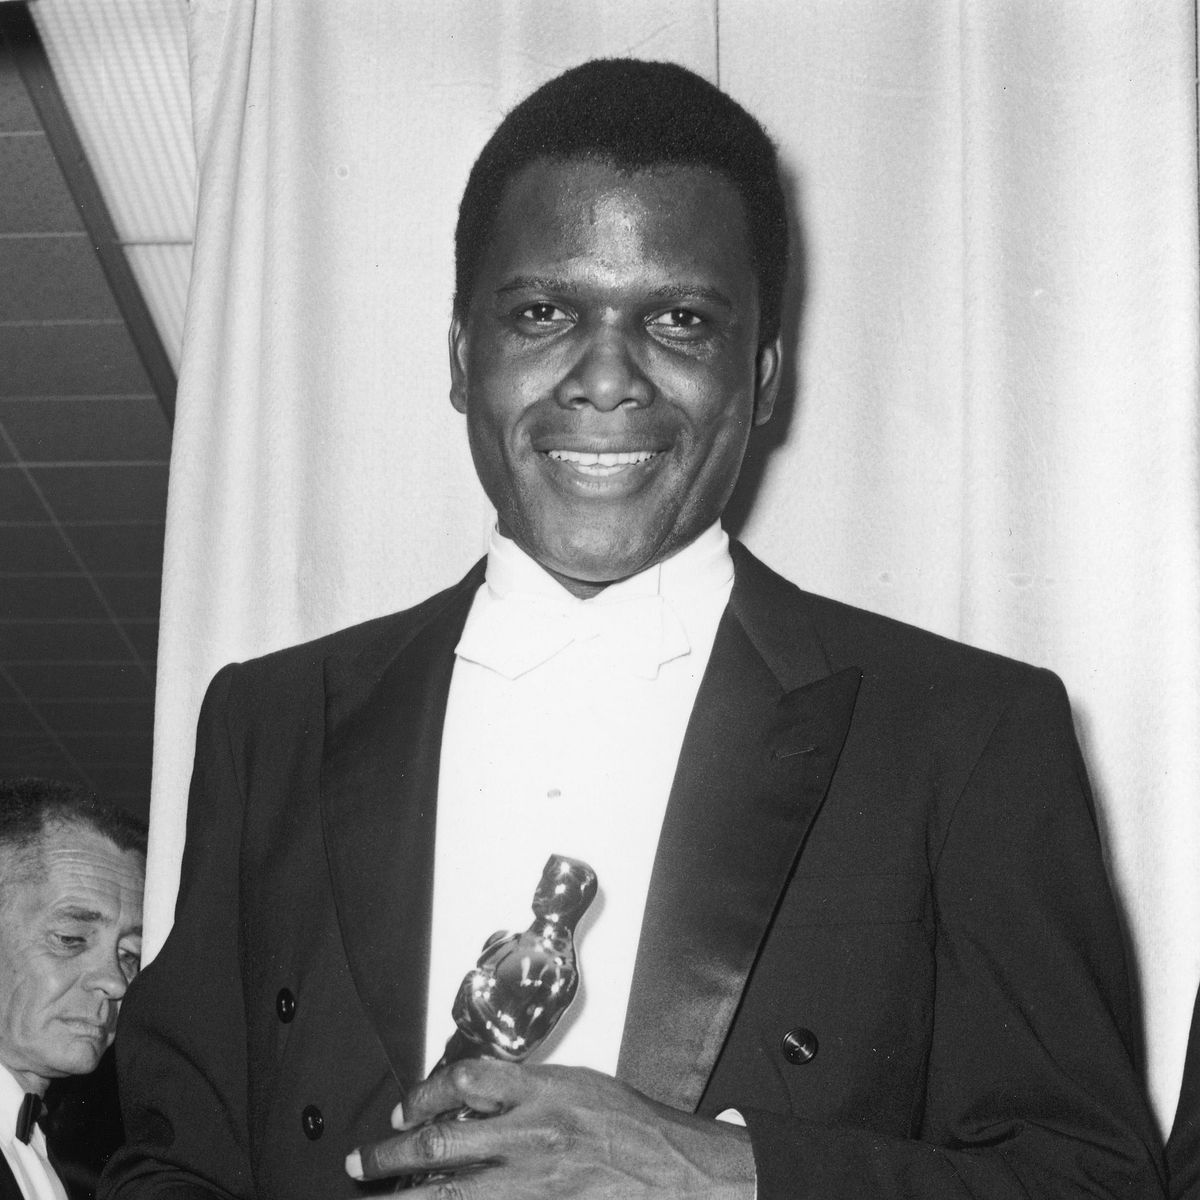 13 April 1964: Sidney #Poitier becomes the first African-American male to win the Best #Actor award during the Academy Awards. He won for the 1963 movie Lilies of the Field. #AcademyAwards #AfricanAmerican #history #OTD #firsts #ad amzn.to/2V4SSX7